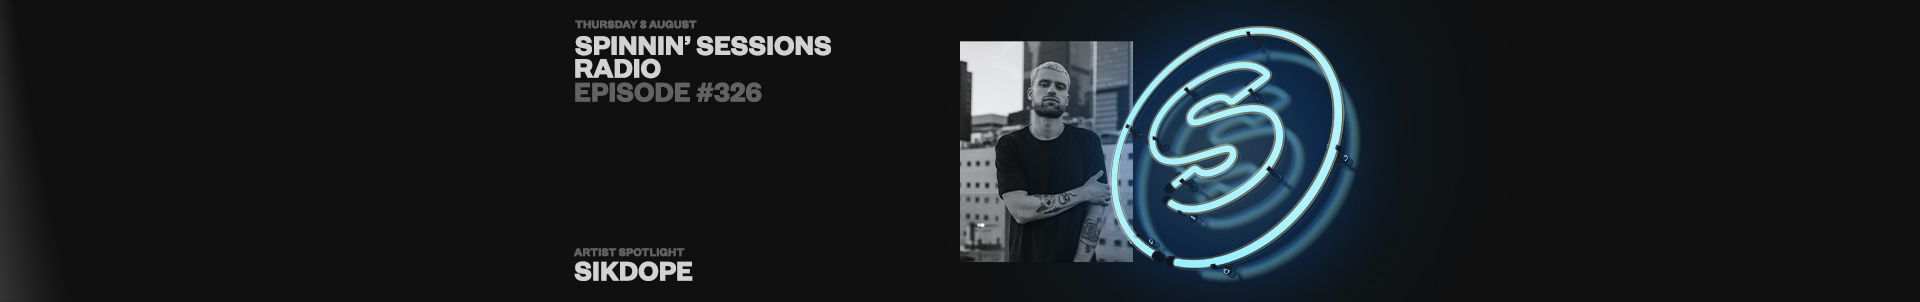 Spinnin' Sessions radio #326 is live now, featuring Sikdope